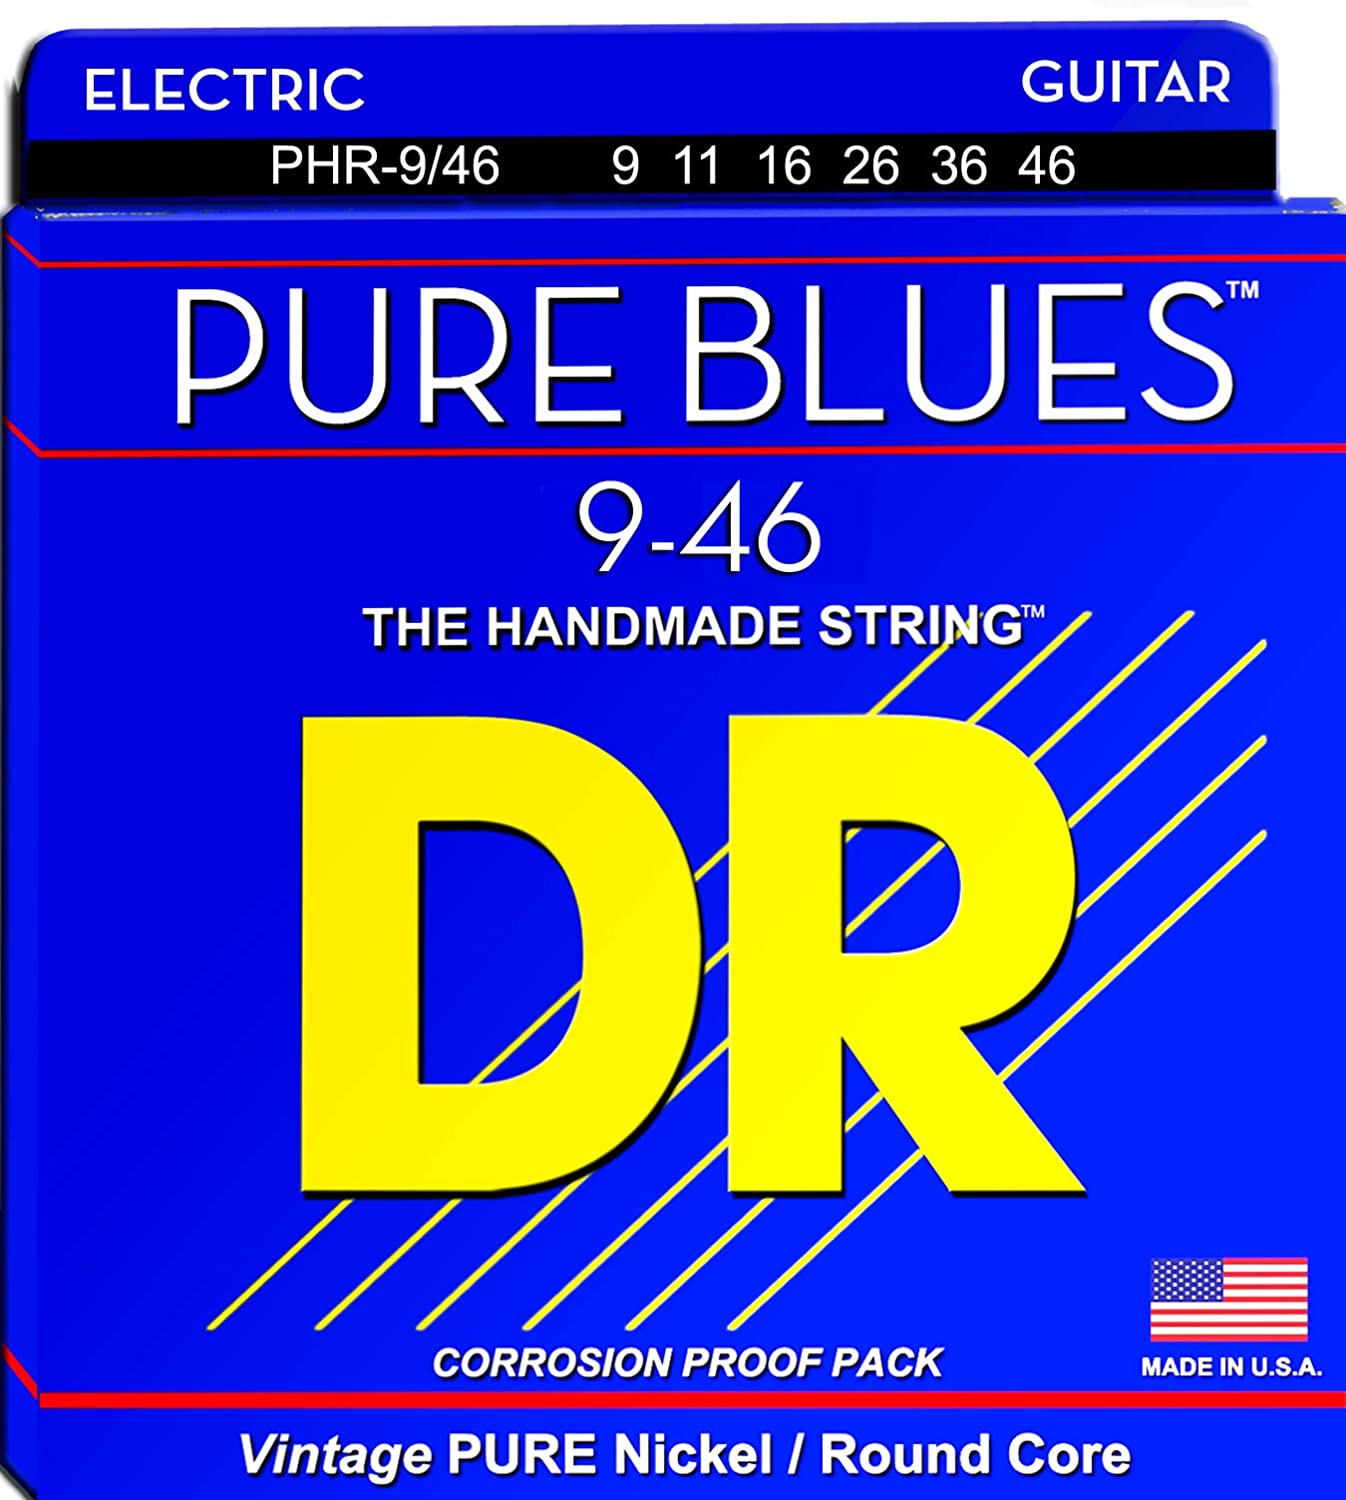 DR Strings Pure Blues Pure Nickel Wrap Round Core on a white background